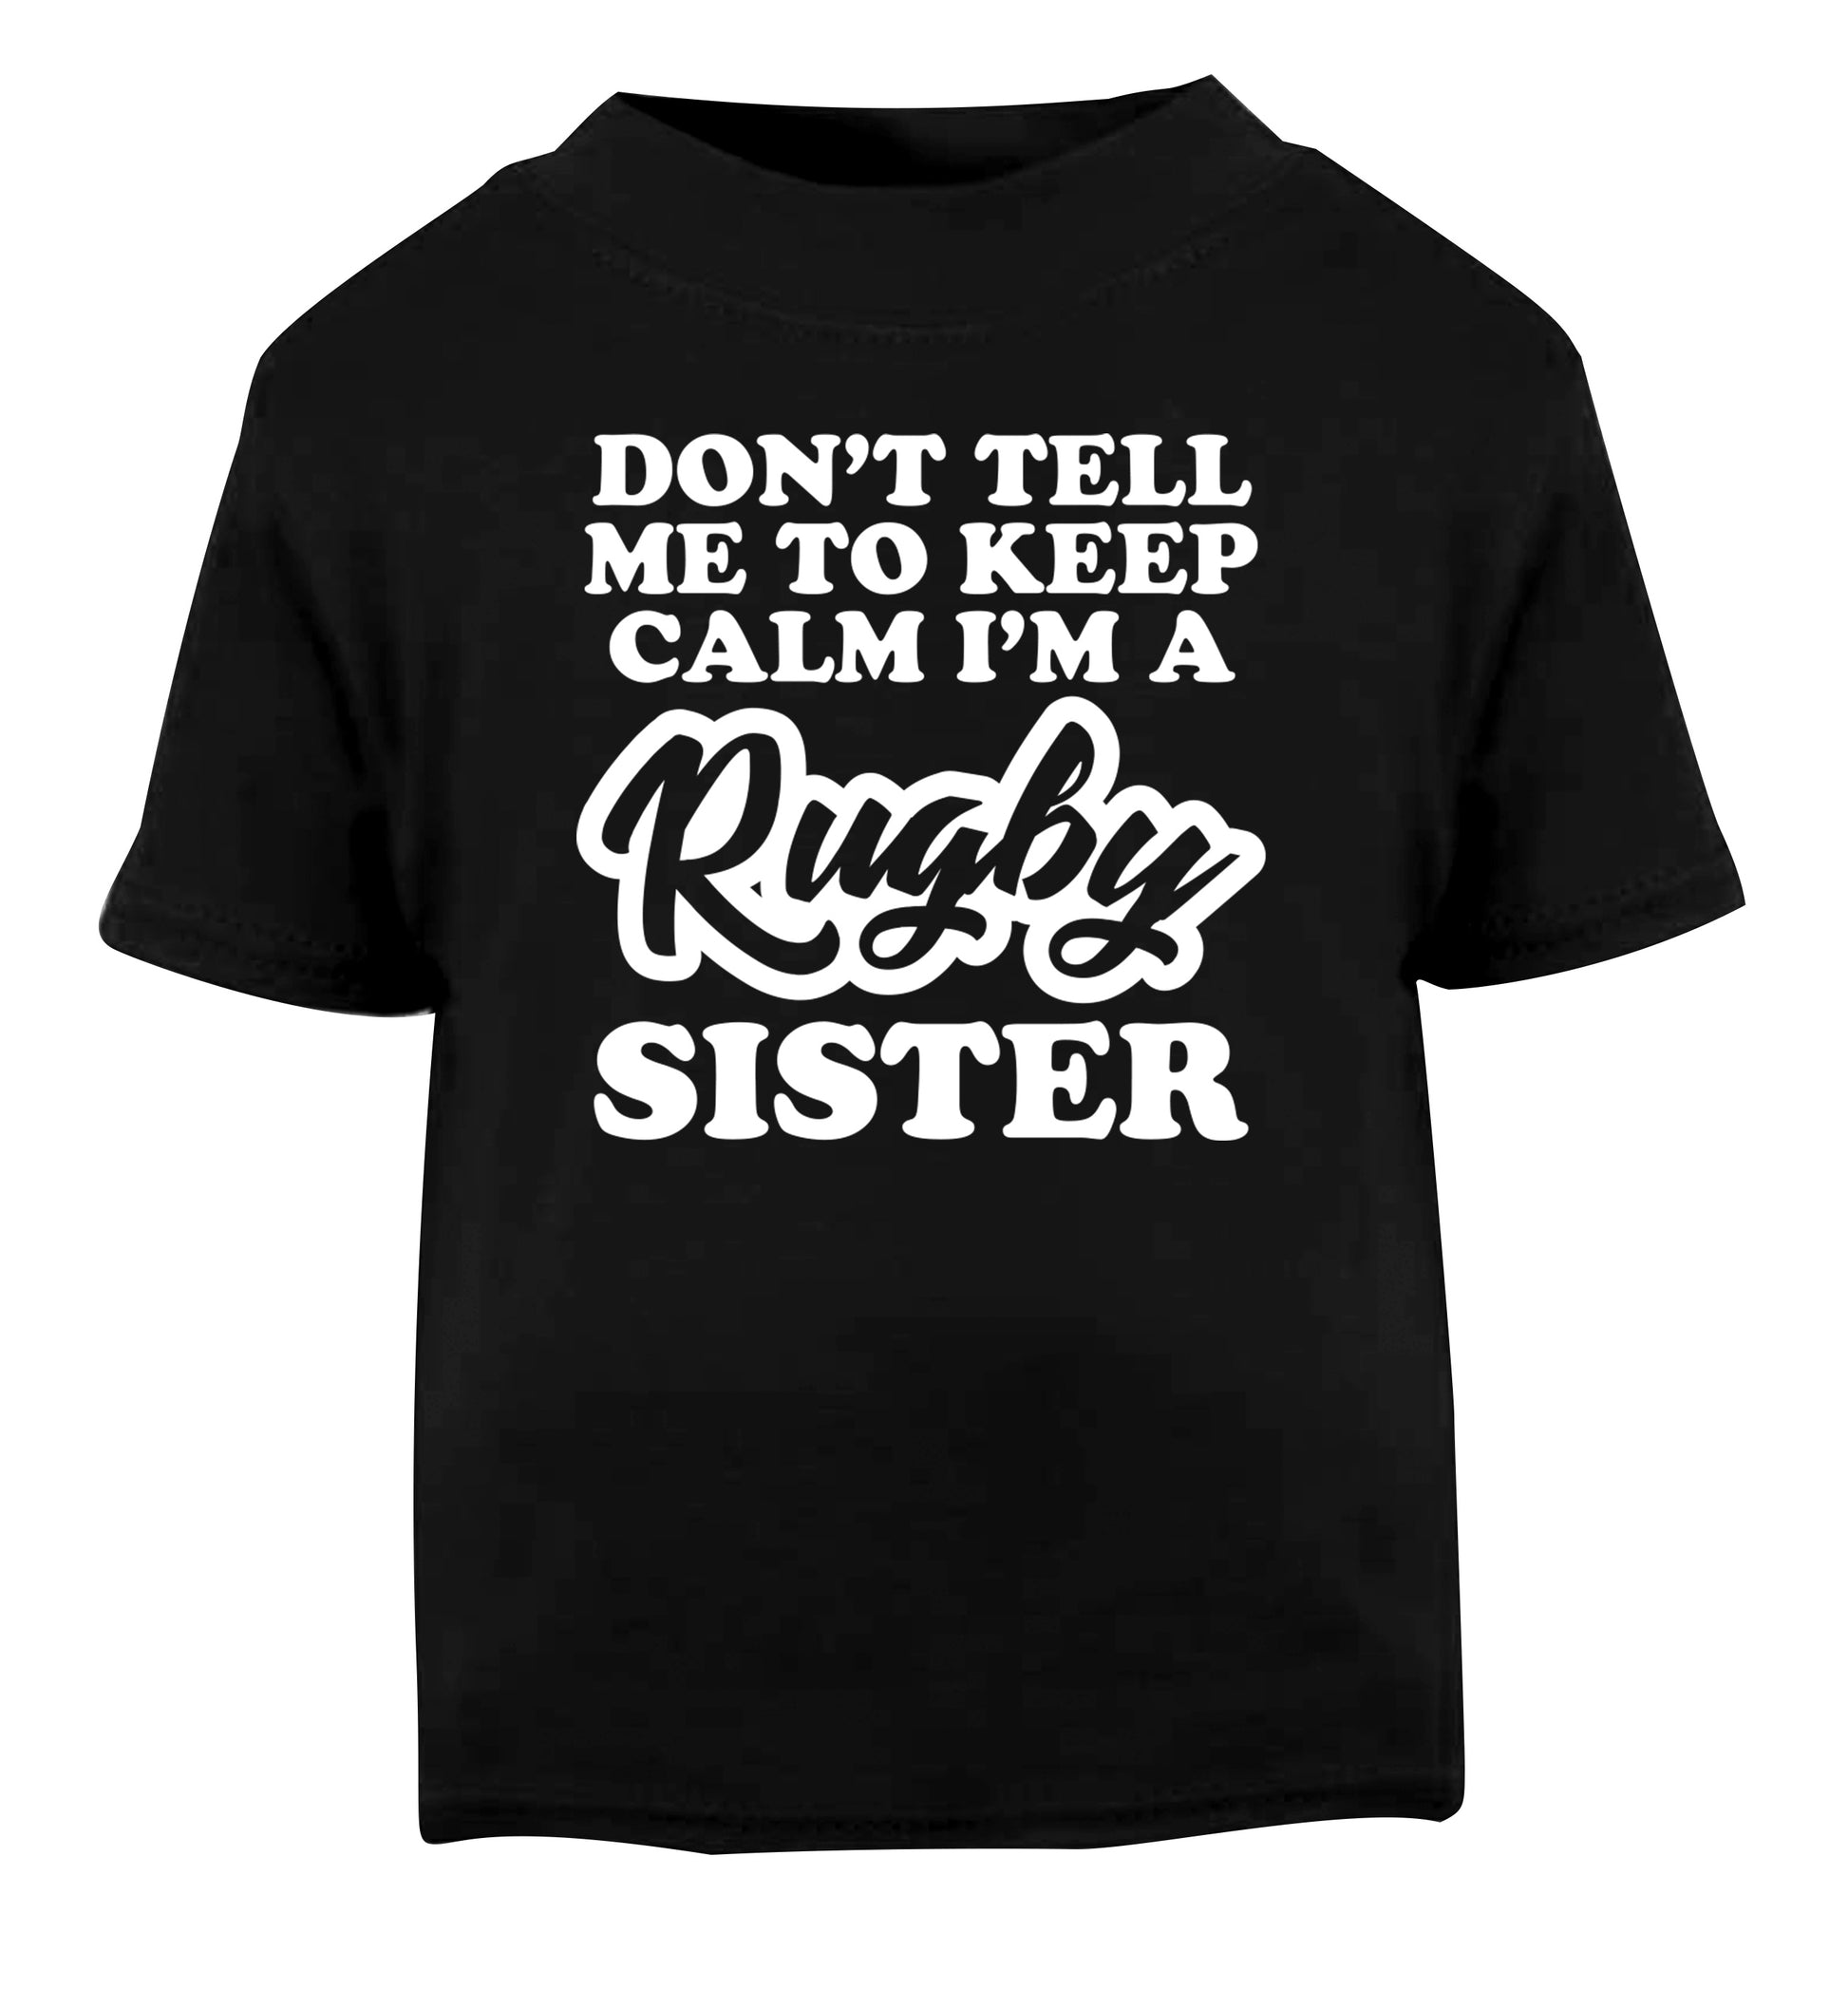 Don't tell me keep calm I'm a rugby sister Black Baby Toddler Tshirt 2 years